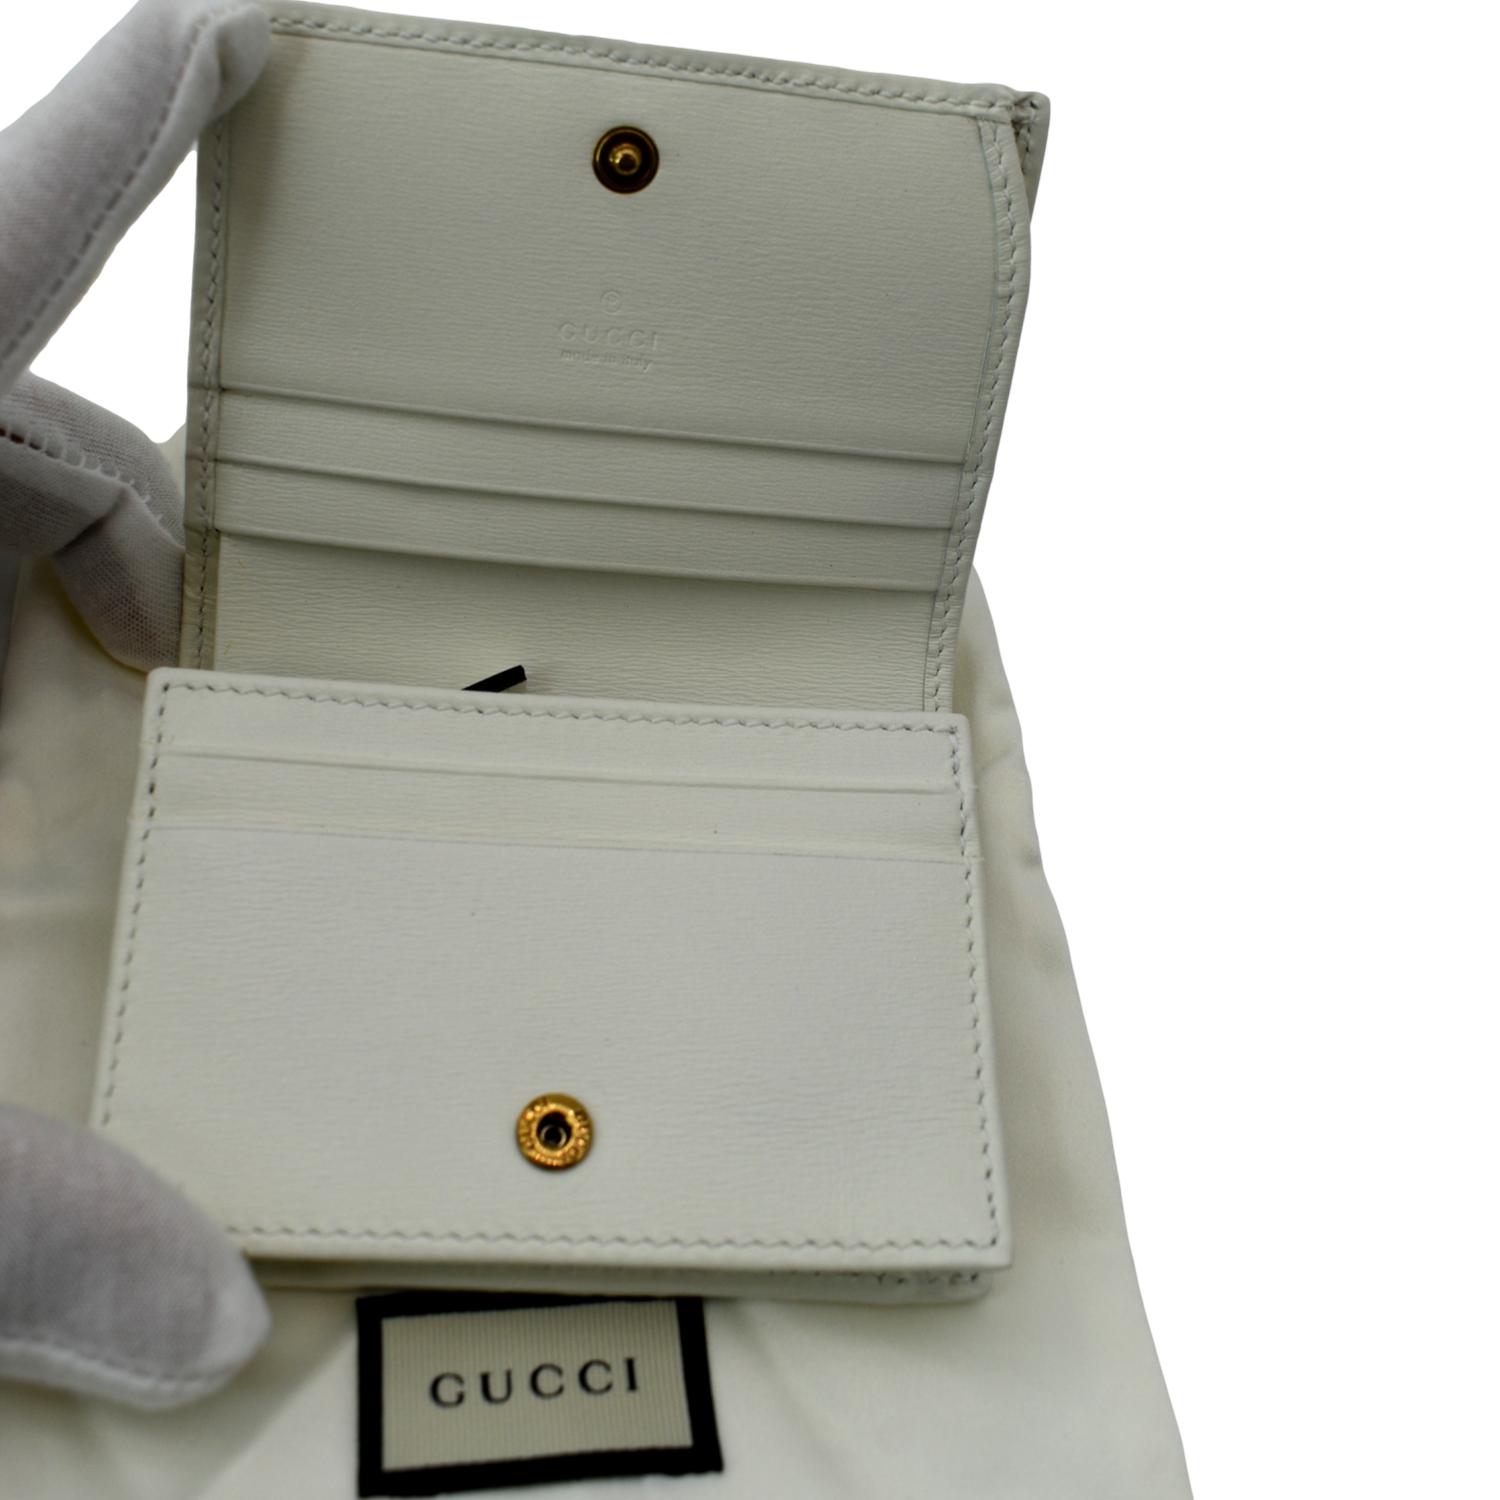 Gucci GG Marmont Card Case in White